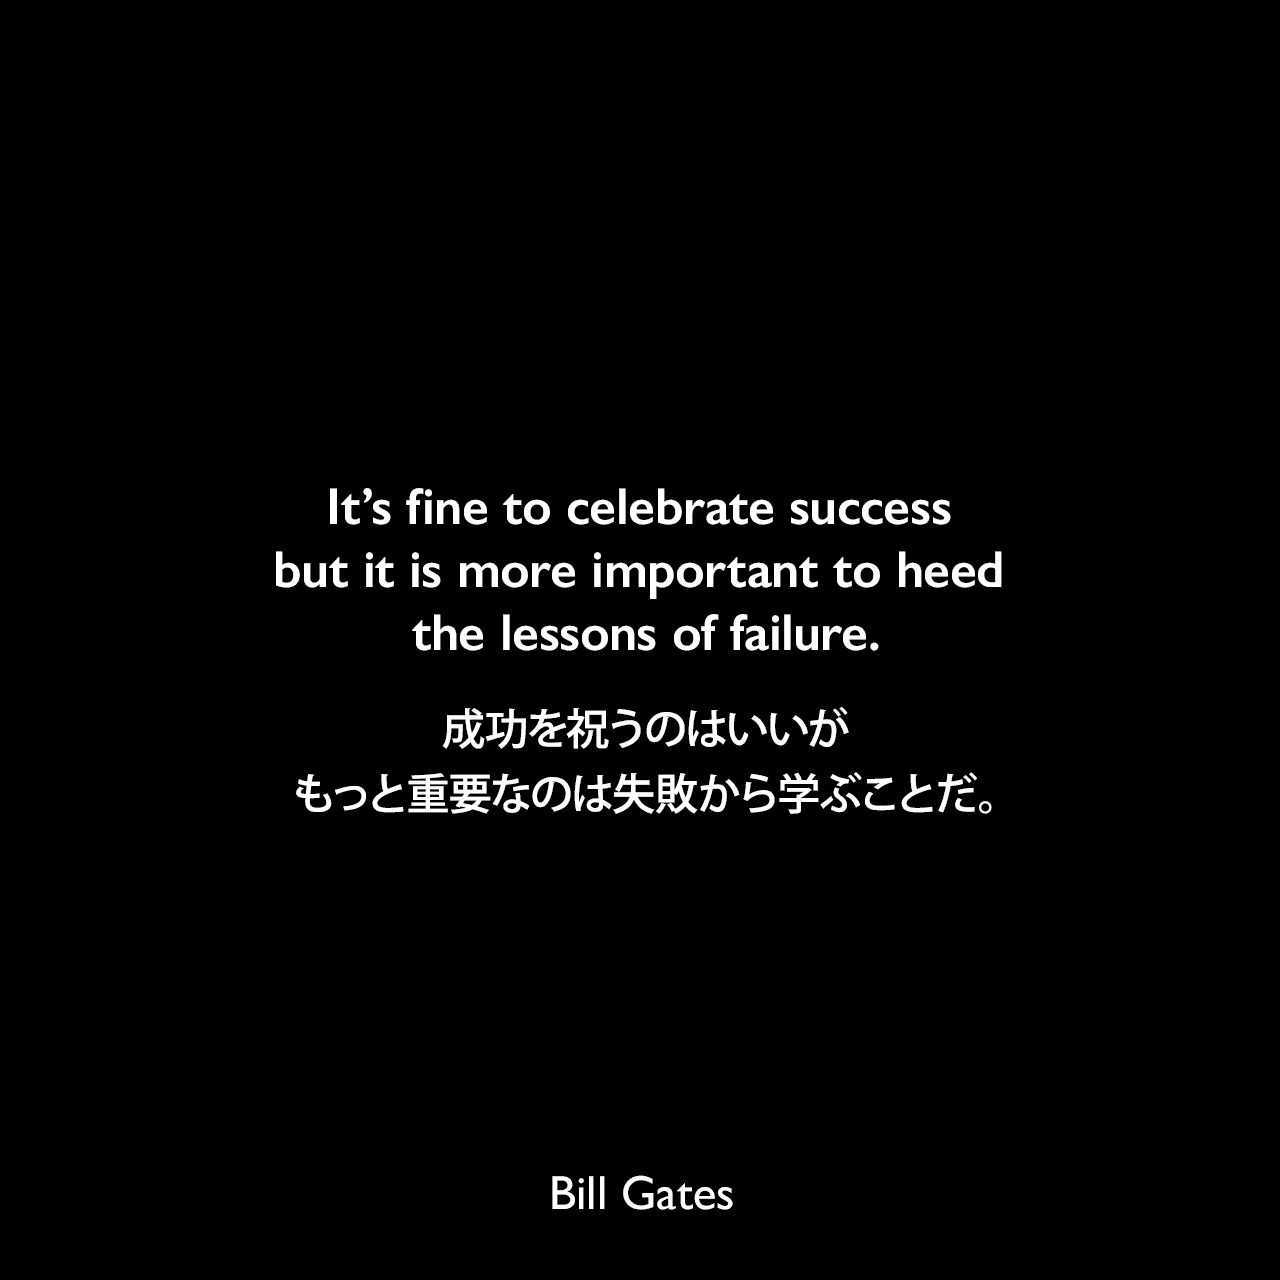 It’s fine to celebrate success but it is more important to heed the lessons of failure.成功を祝うのはいいが、もっと重要なのは失敗から学ぶことだ。